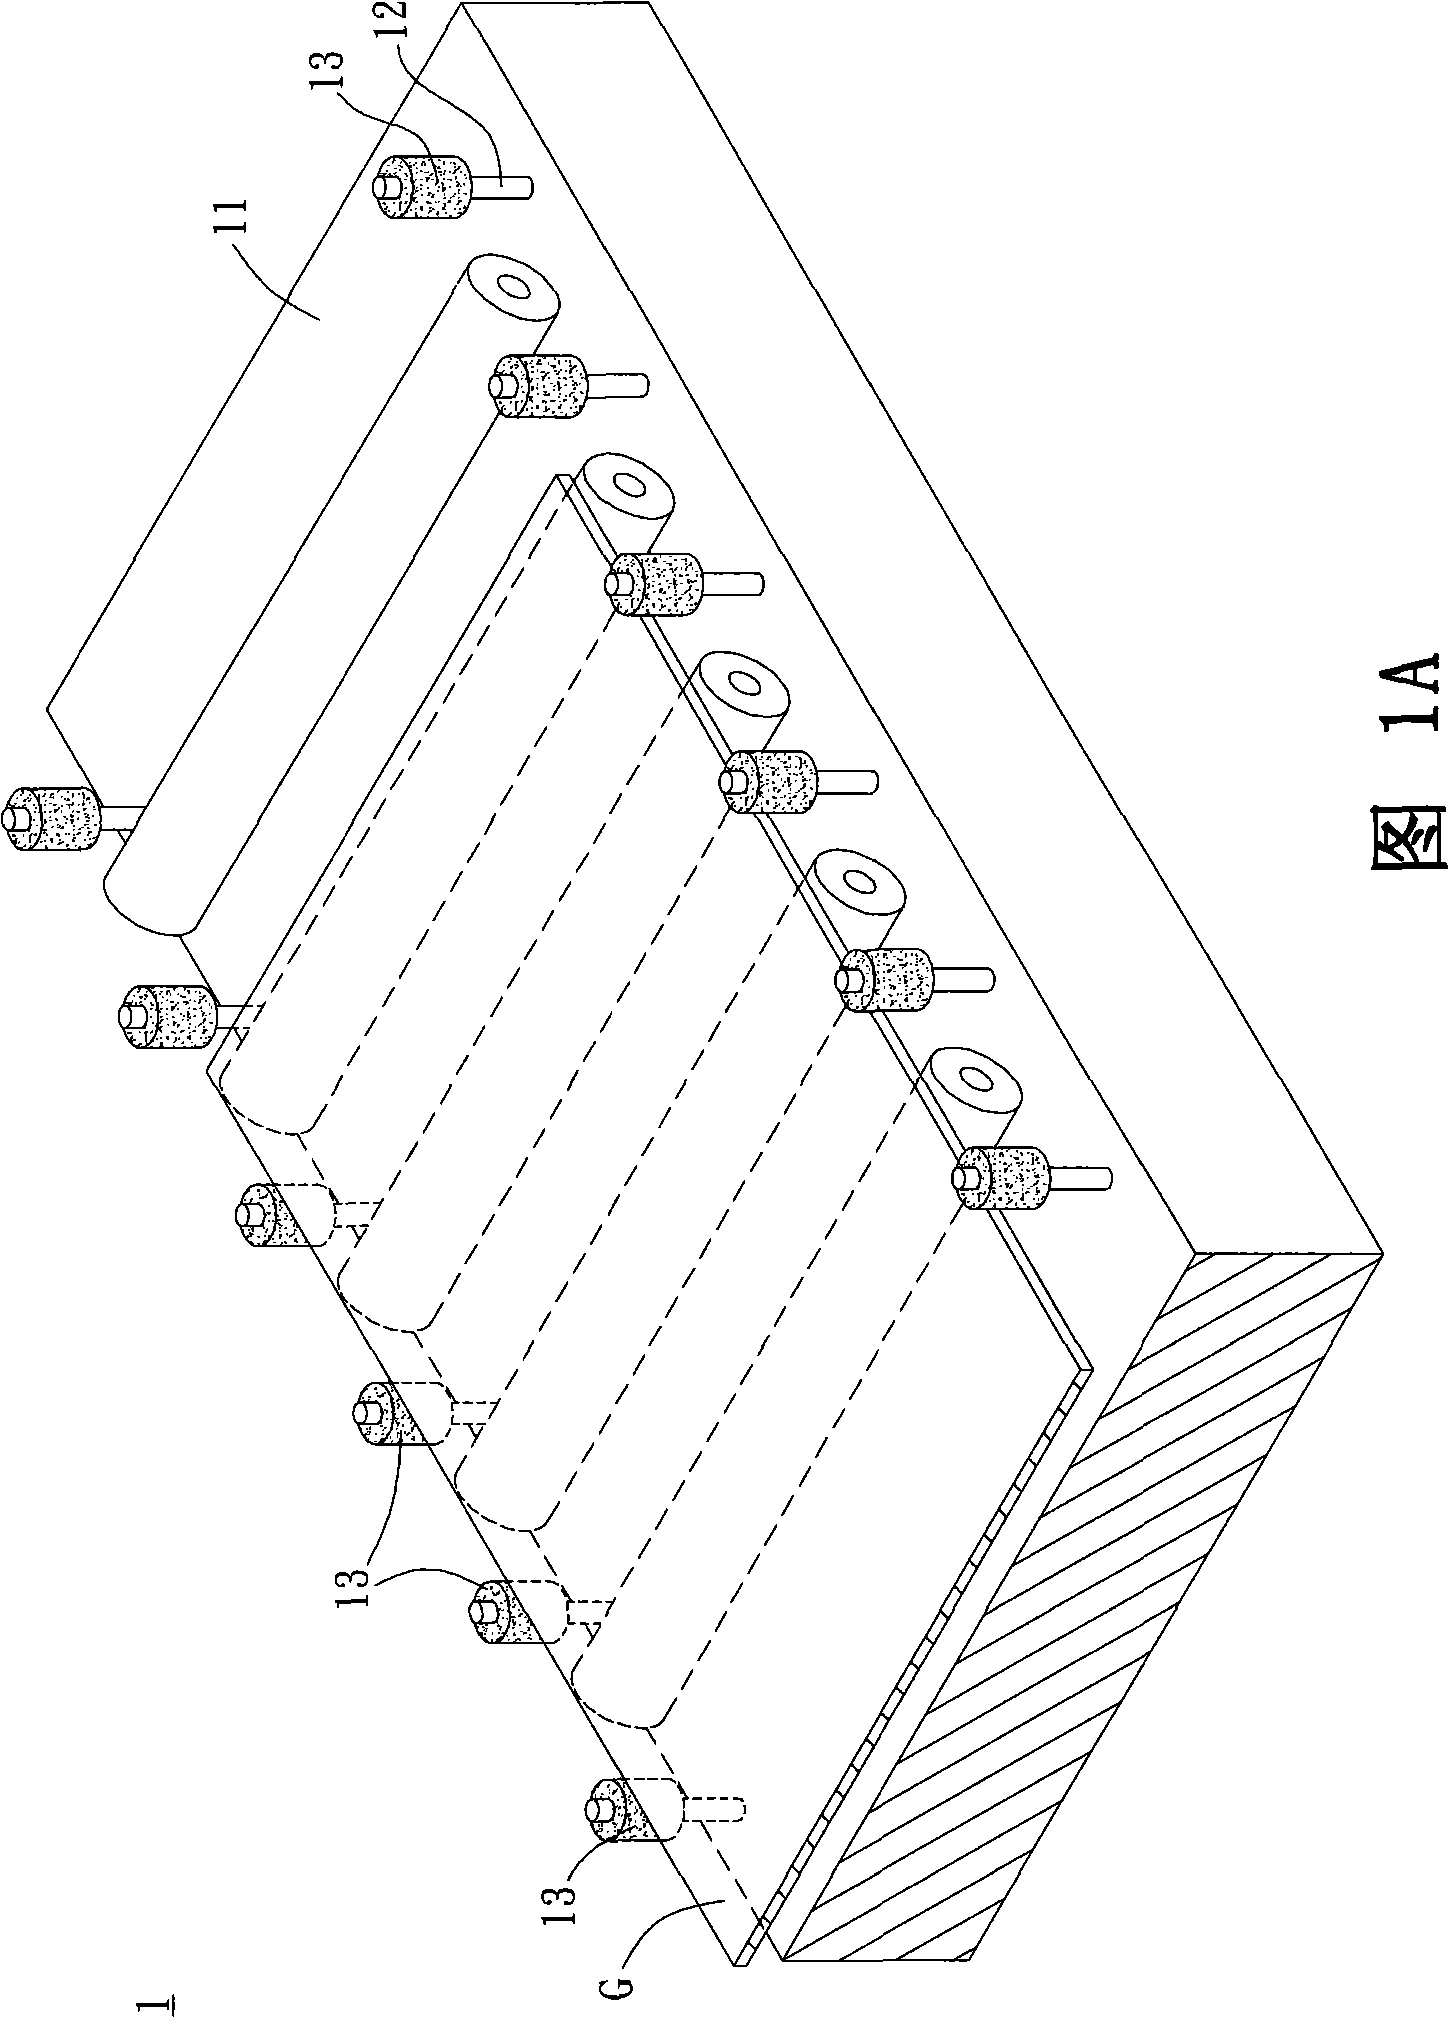 Convection guide device